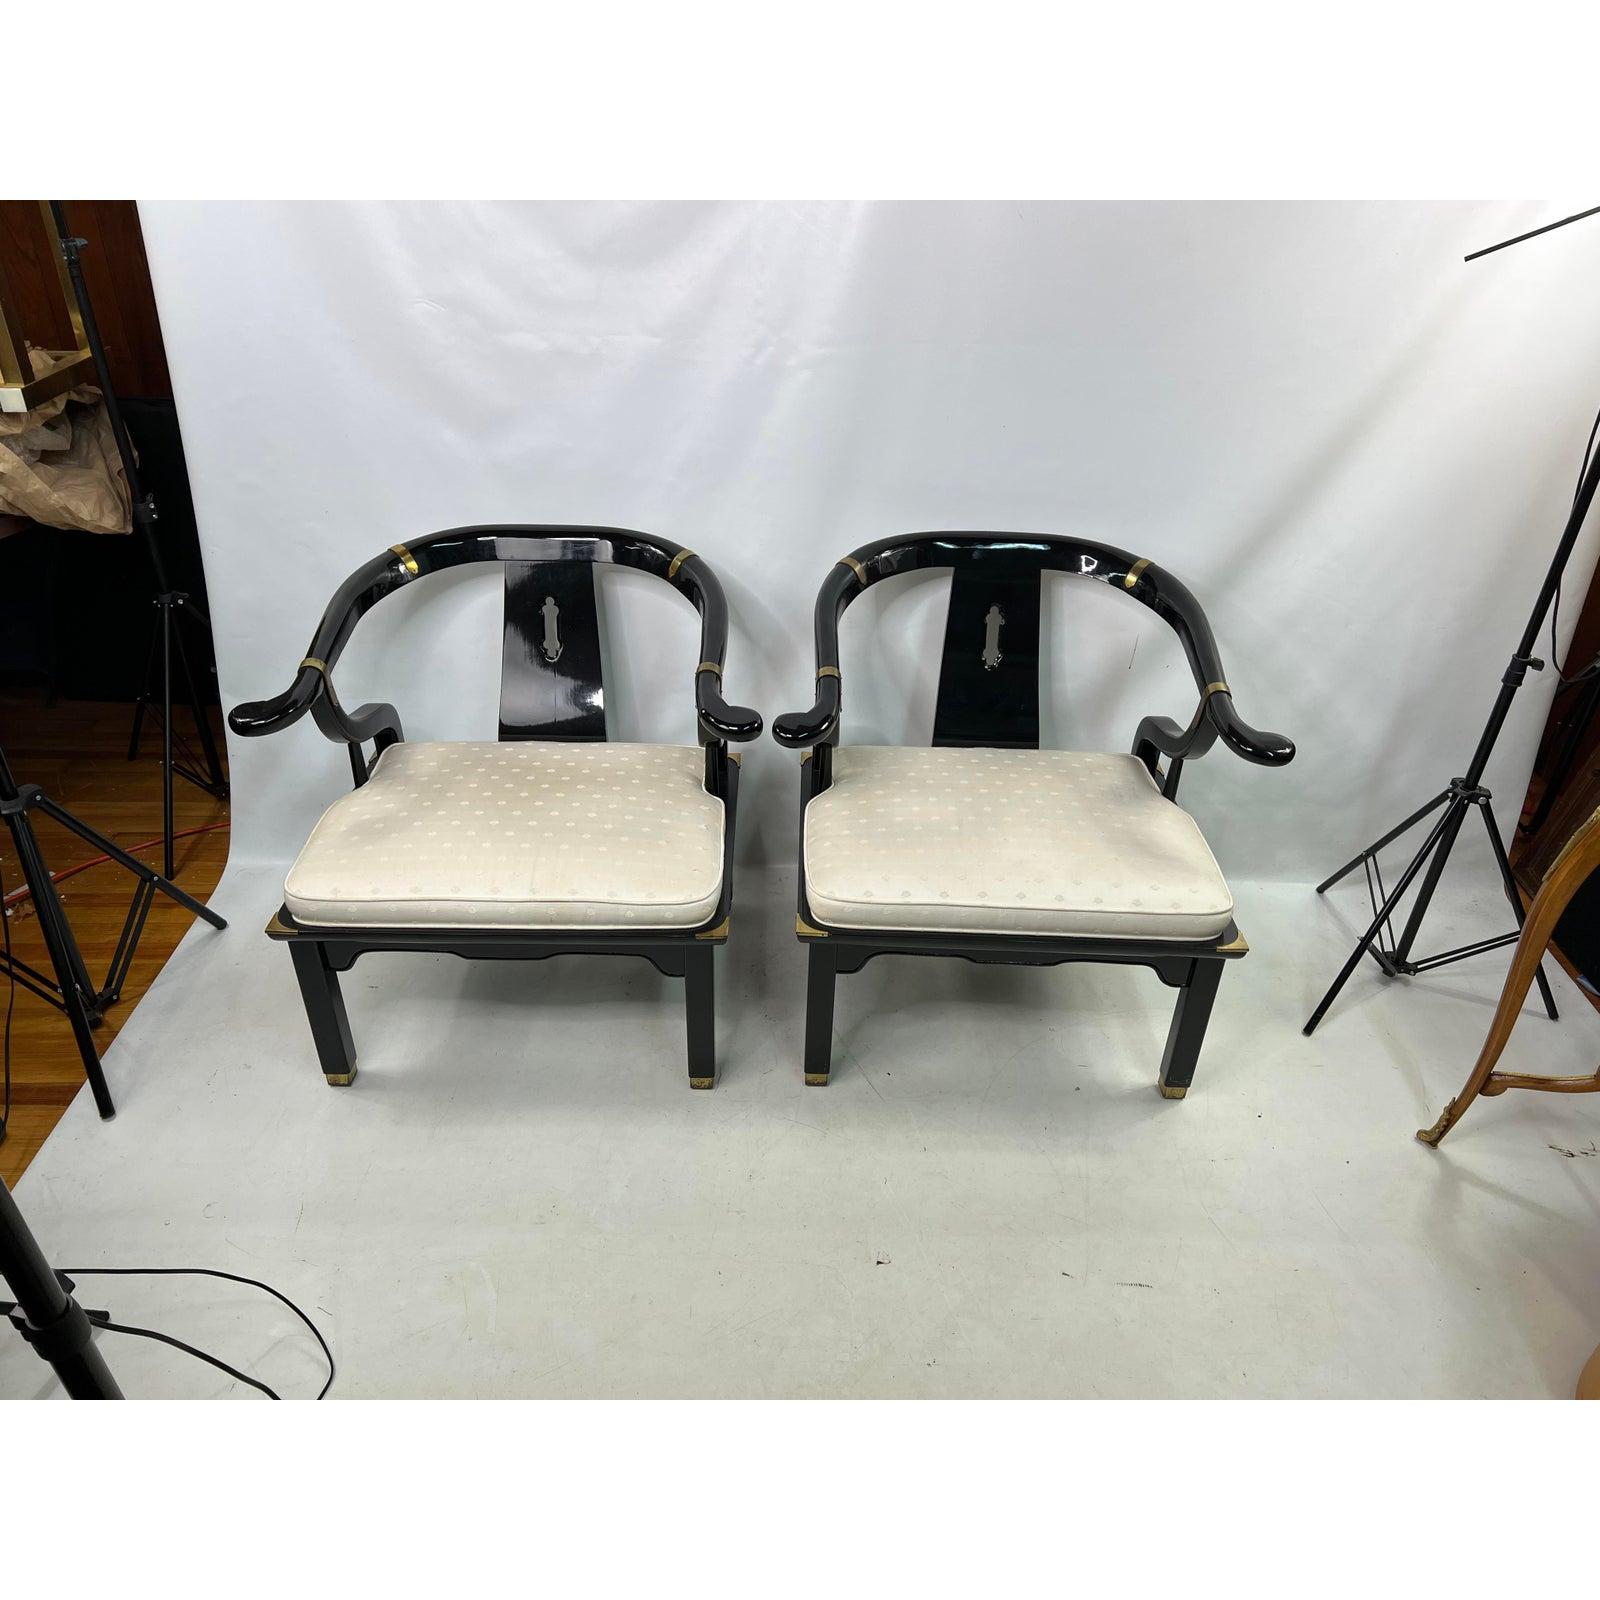 1960s James Mont style black lacquer Asian Modern Chinoiserie Ming chairs - a pair.